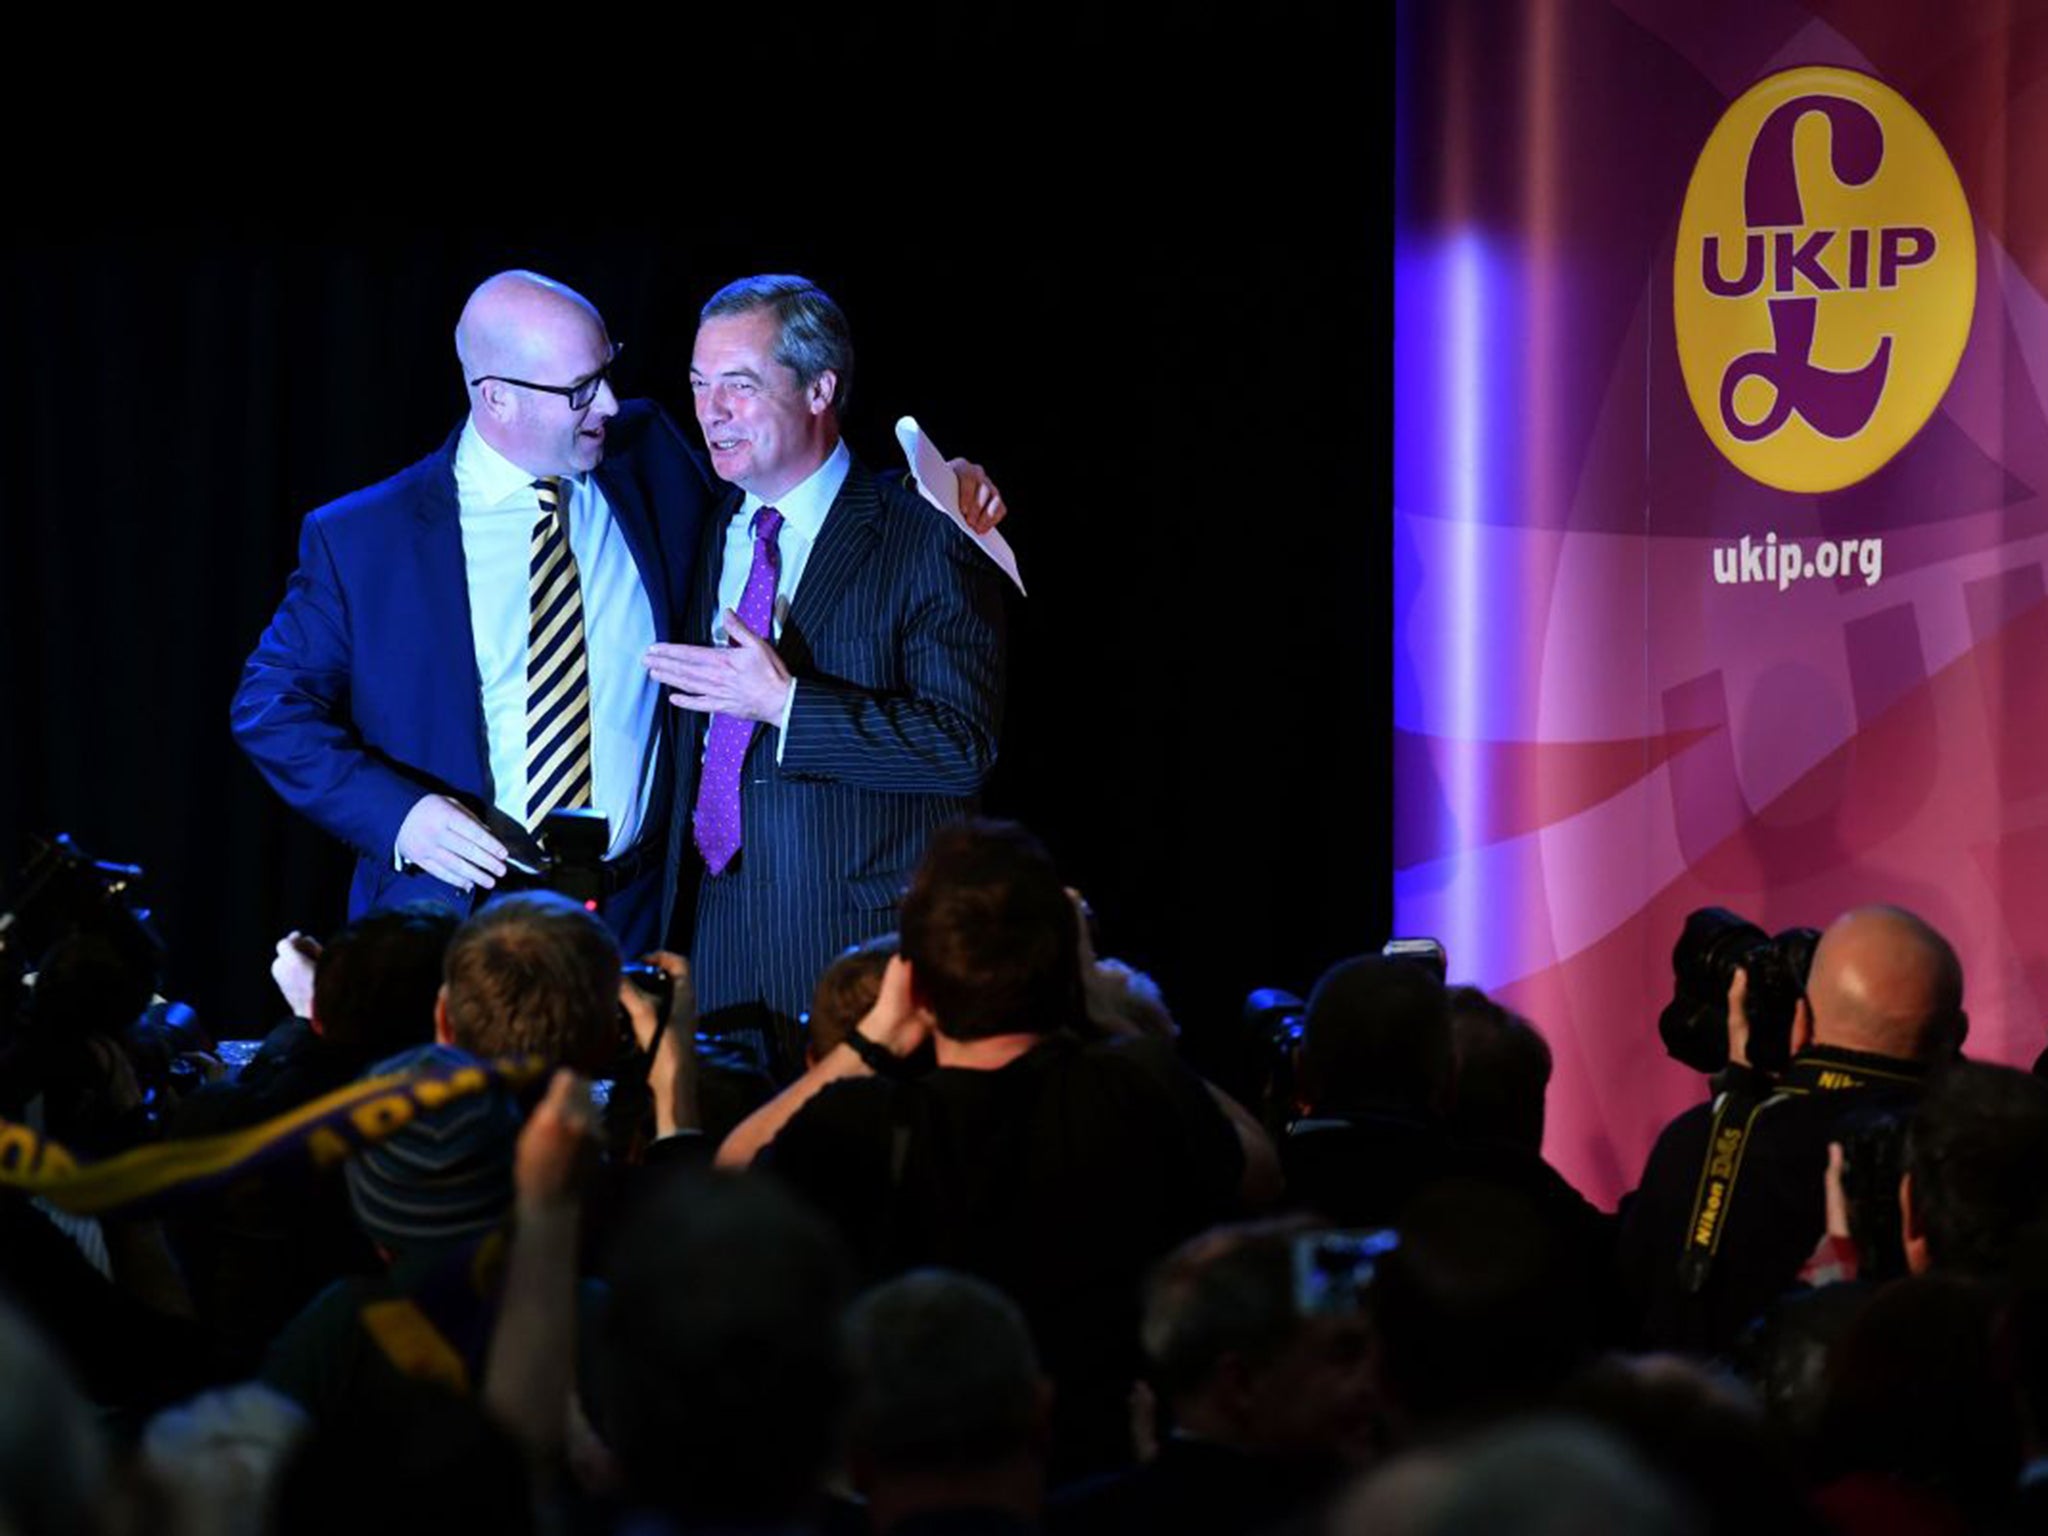 Paul Nuttall and Nigel Farage on stage after the recent leadership election announcement